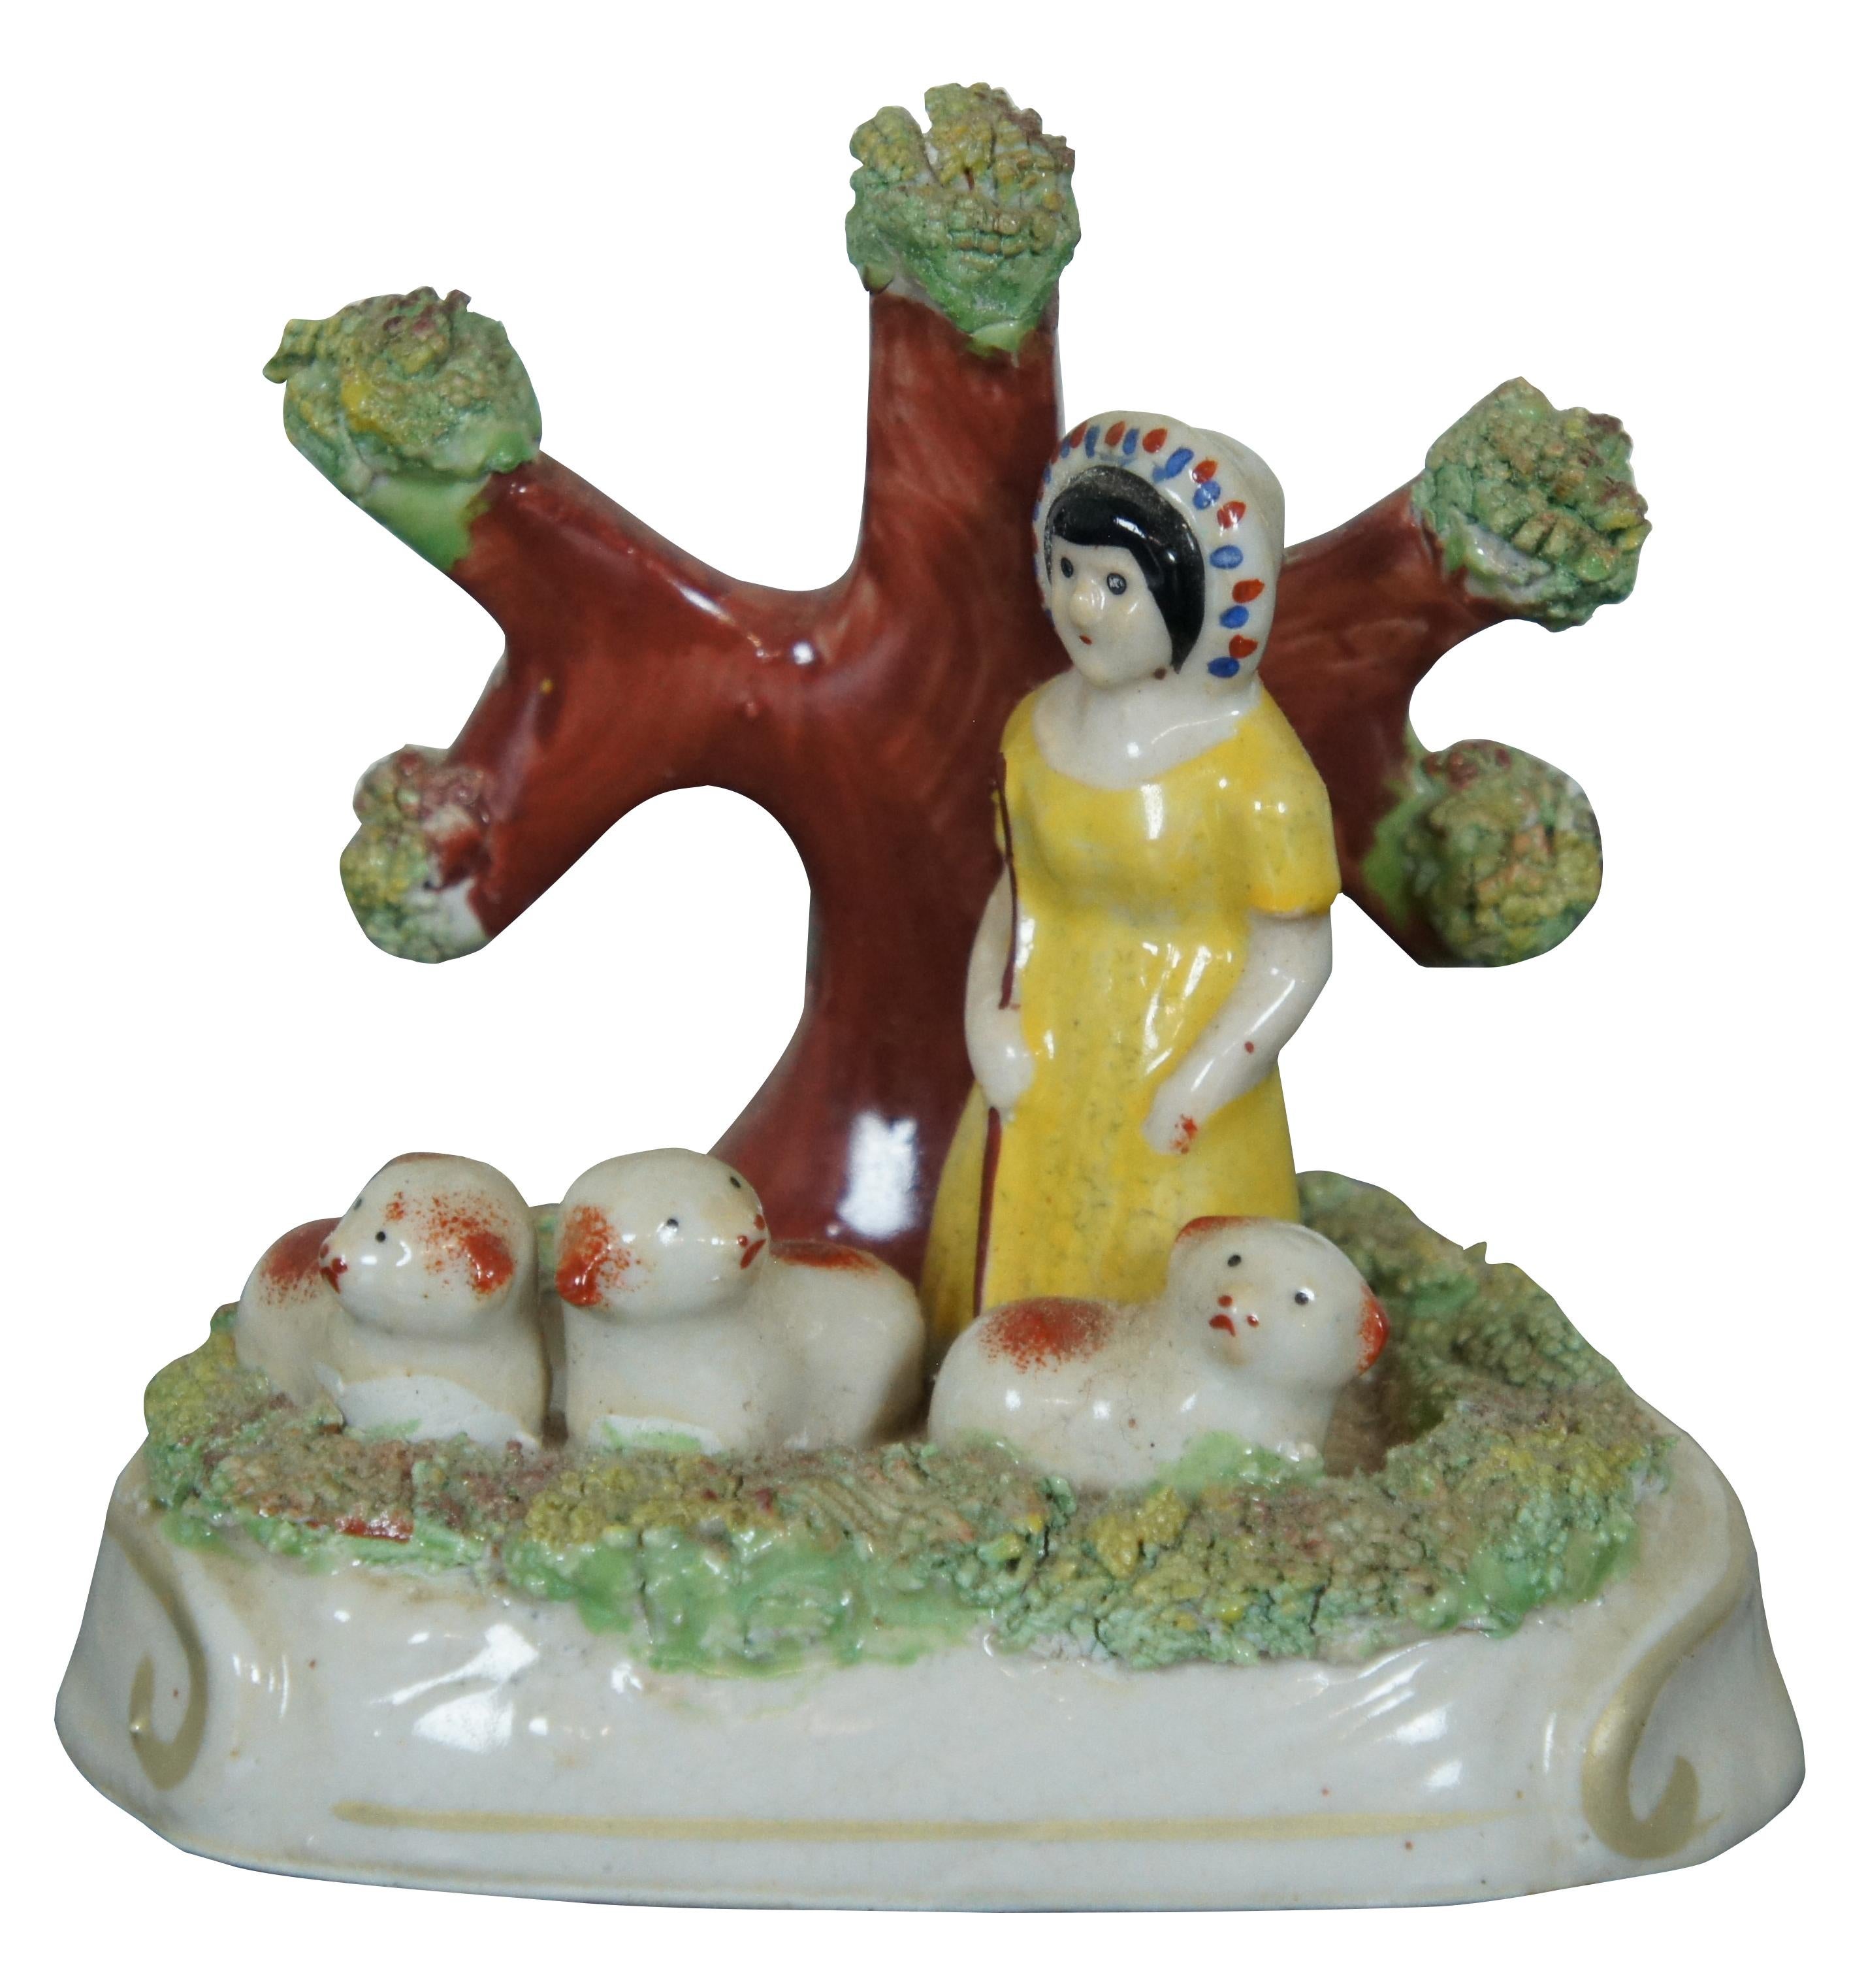 Pair of antique early Staffordshire pearlware bocage figures, a shepherd and a shepherdess each standing in front of a tree with three red and white sheep / lambs. Each piece uses shredded clay to simulate grass and foliage. Attributed to the James